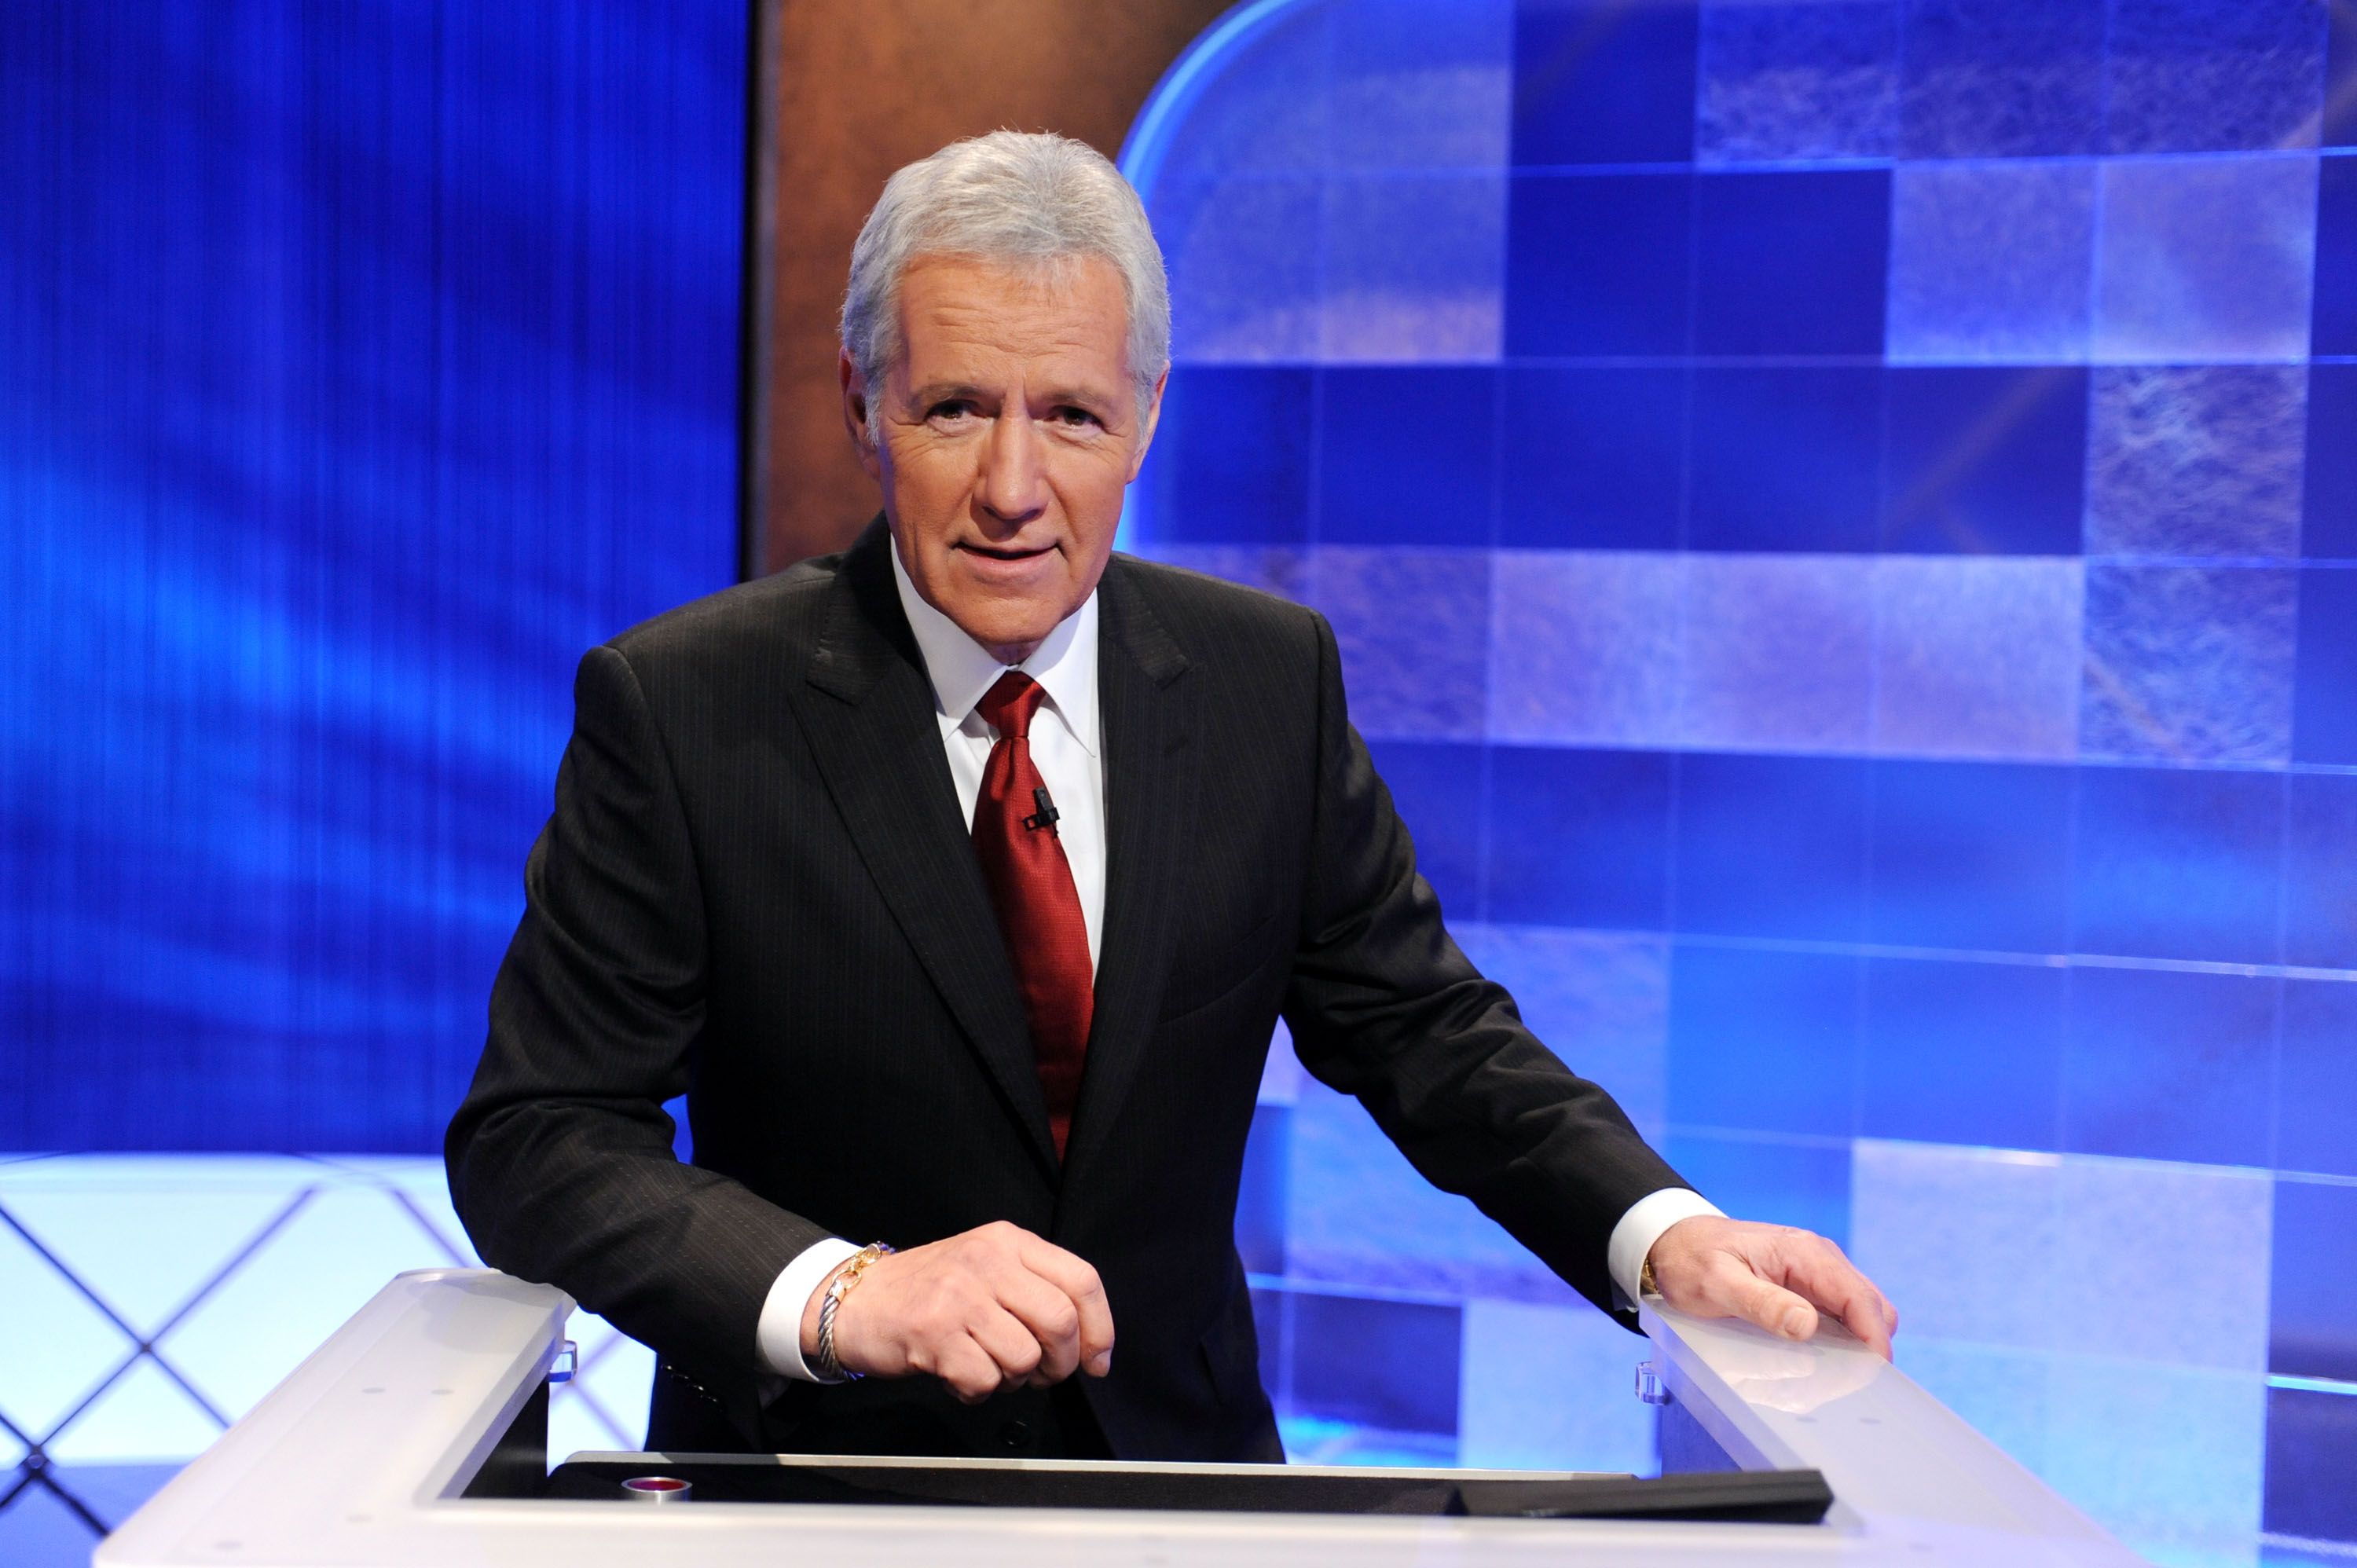 <p><em>Jeopardy! </em>contestants undoubtedly have the smarts. Show participants have to pass a test and ace an audition for the chance to compete, but even the smarties who make it on the long-running trivia competition get stumped sometimes. These 40 insanely difficult <em>Jeopardy! </em>questions have the distinction of being "triple stumpers" — meaning not a single one of the episode's three players could successfully answer them. Test your own know-how and see if you can flourish where they floundered. Hey, even if you can only answer one correctly, you're still smarter than a <em>Jeopardy!</em> contestant (at least in that one instance). </p>